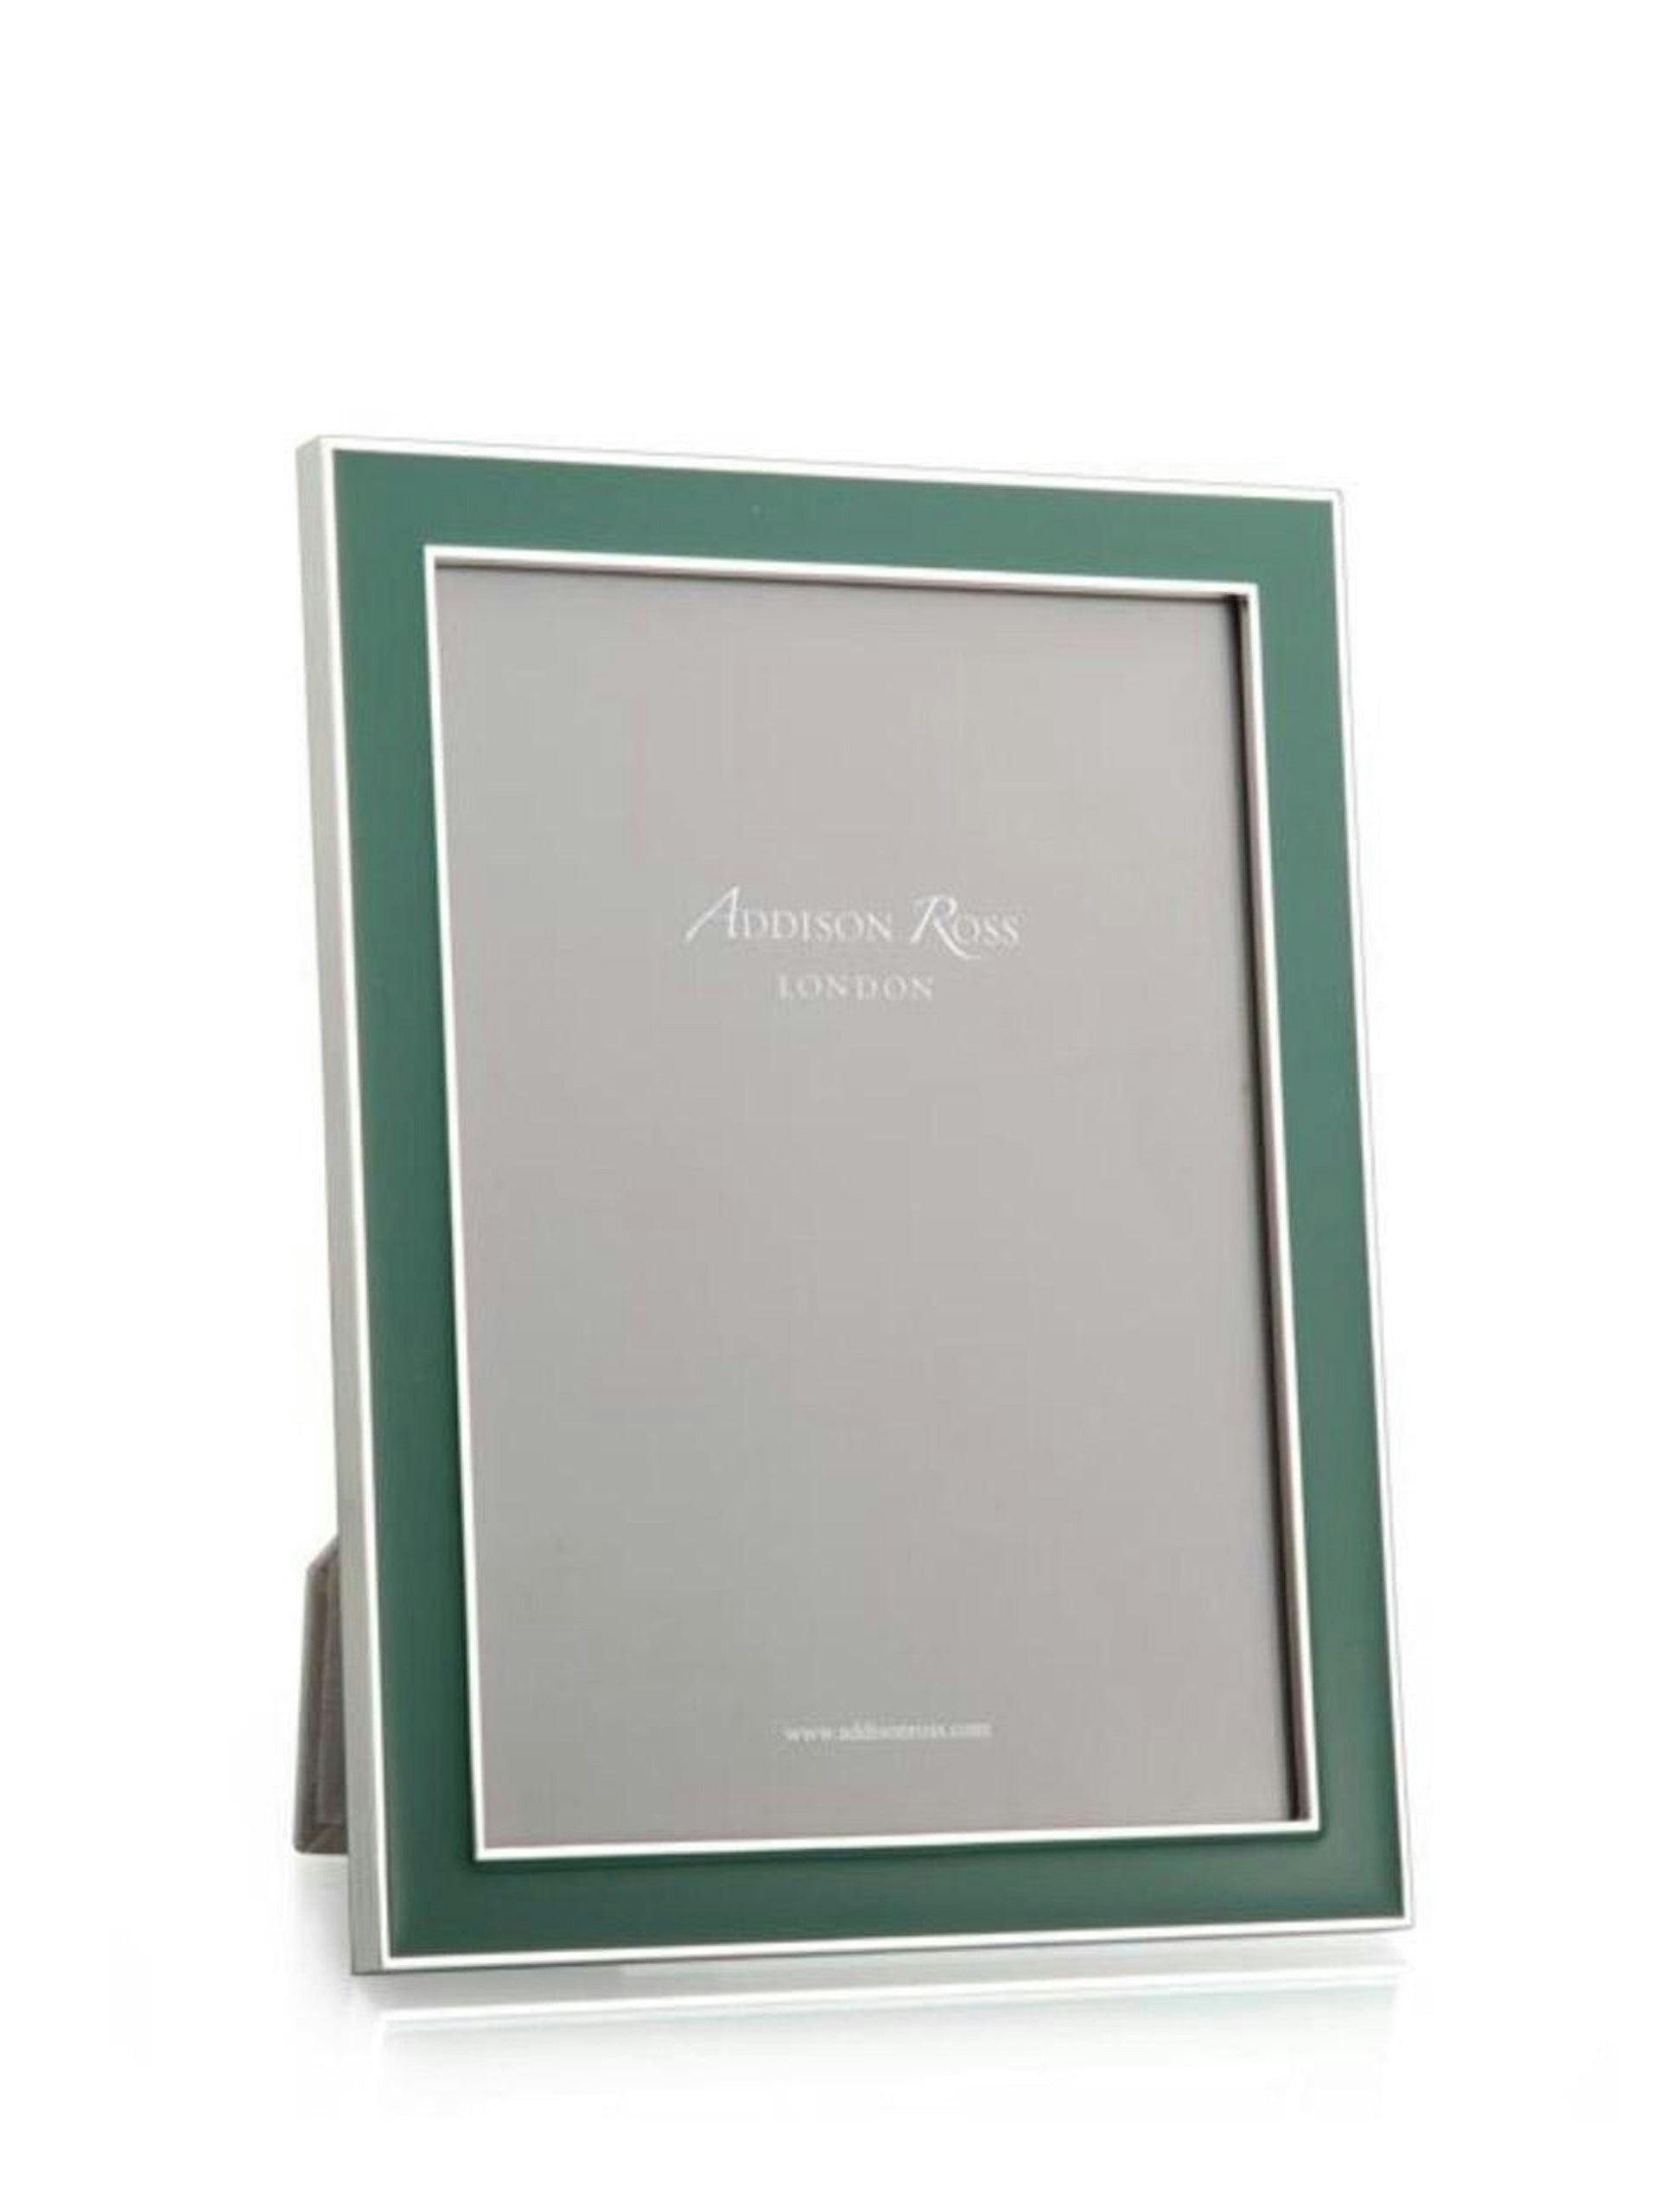 Green enamel and silver frame